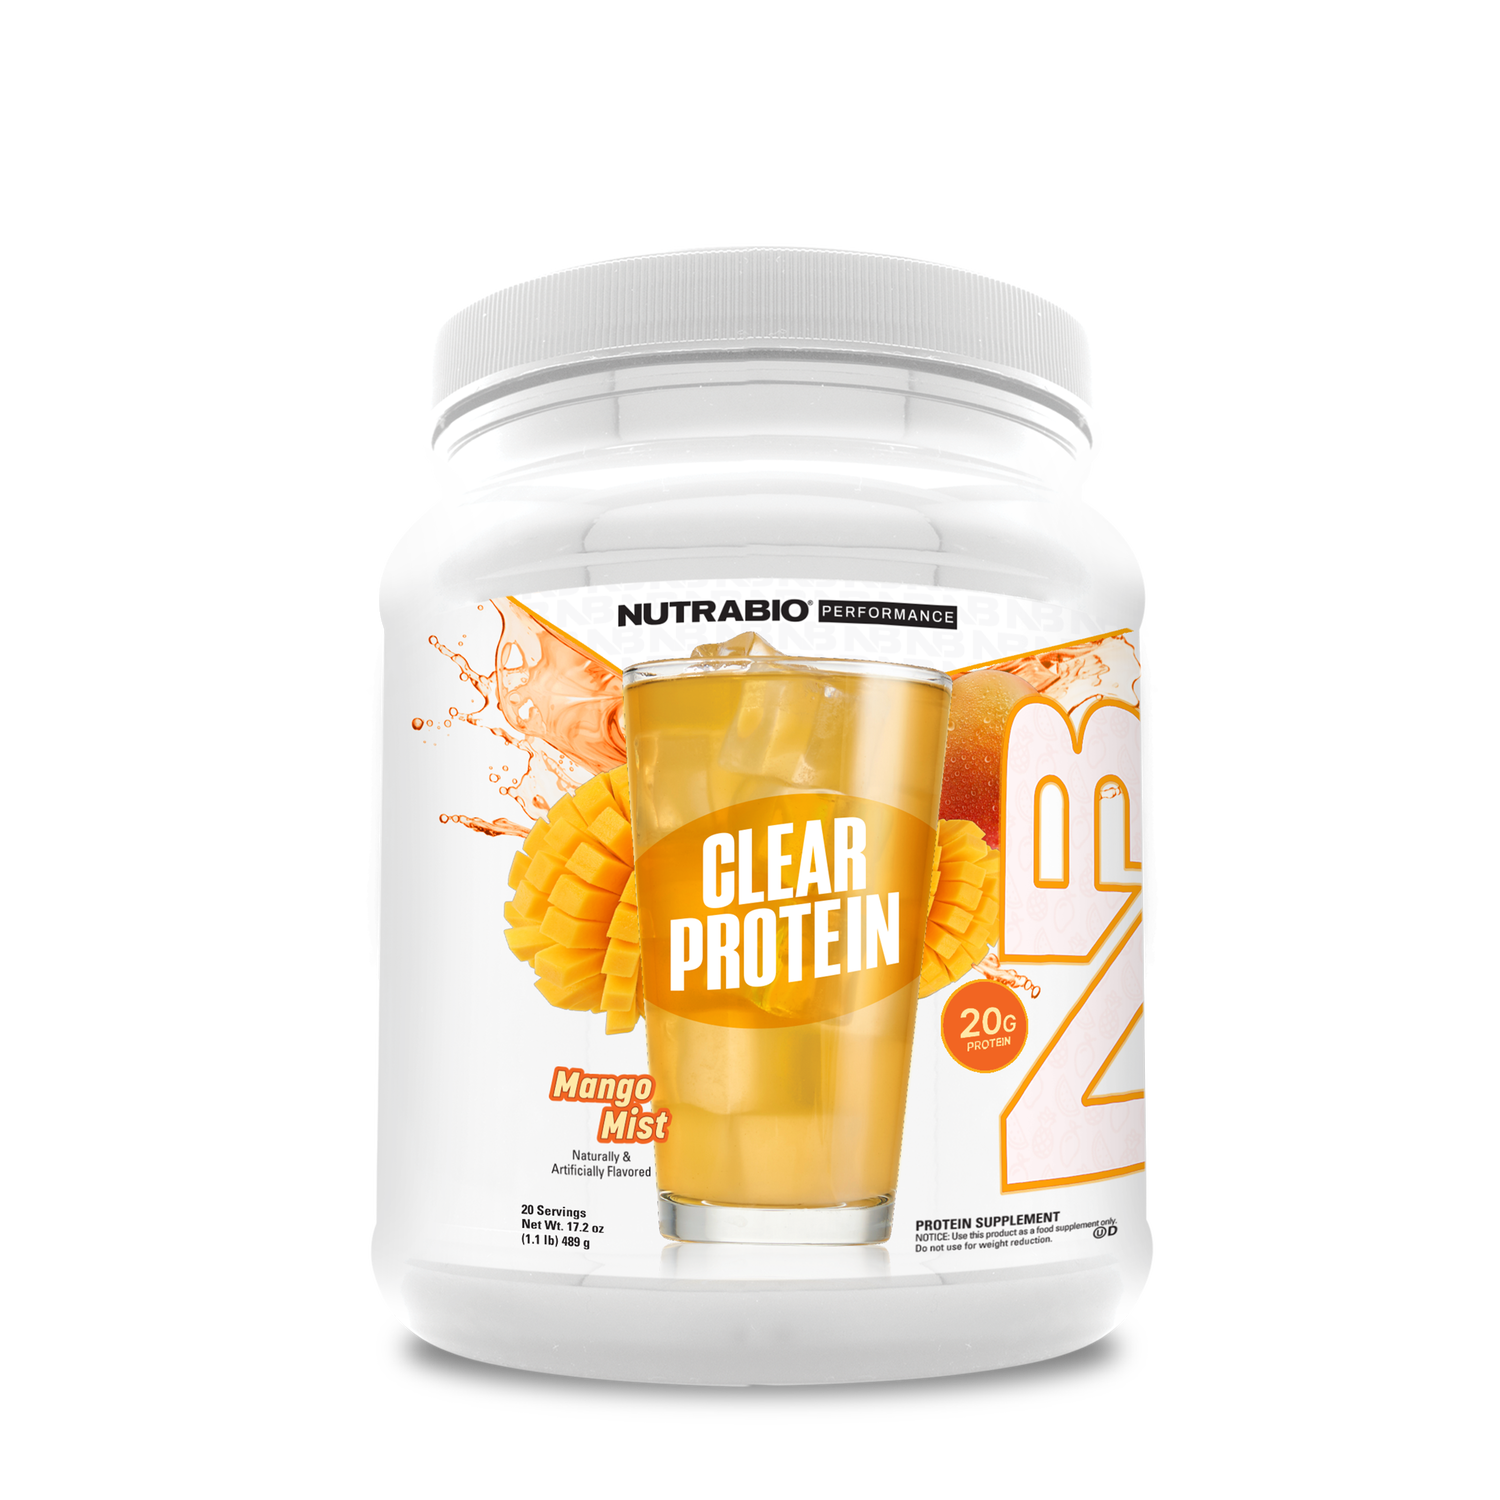 NutraBio Clear Whey Protein Isolate